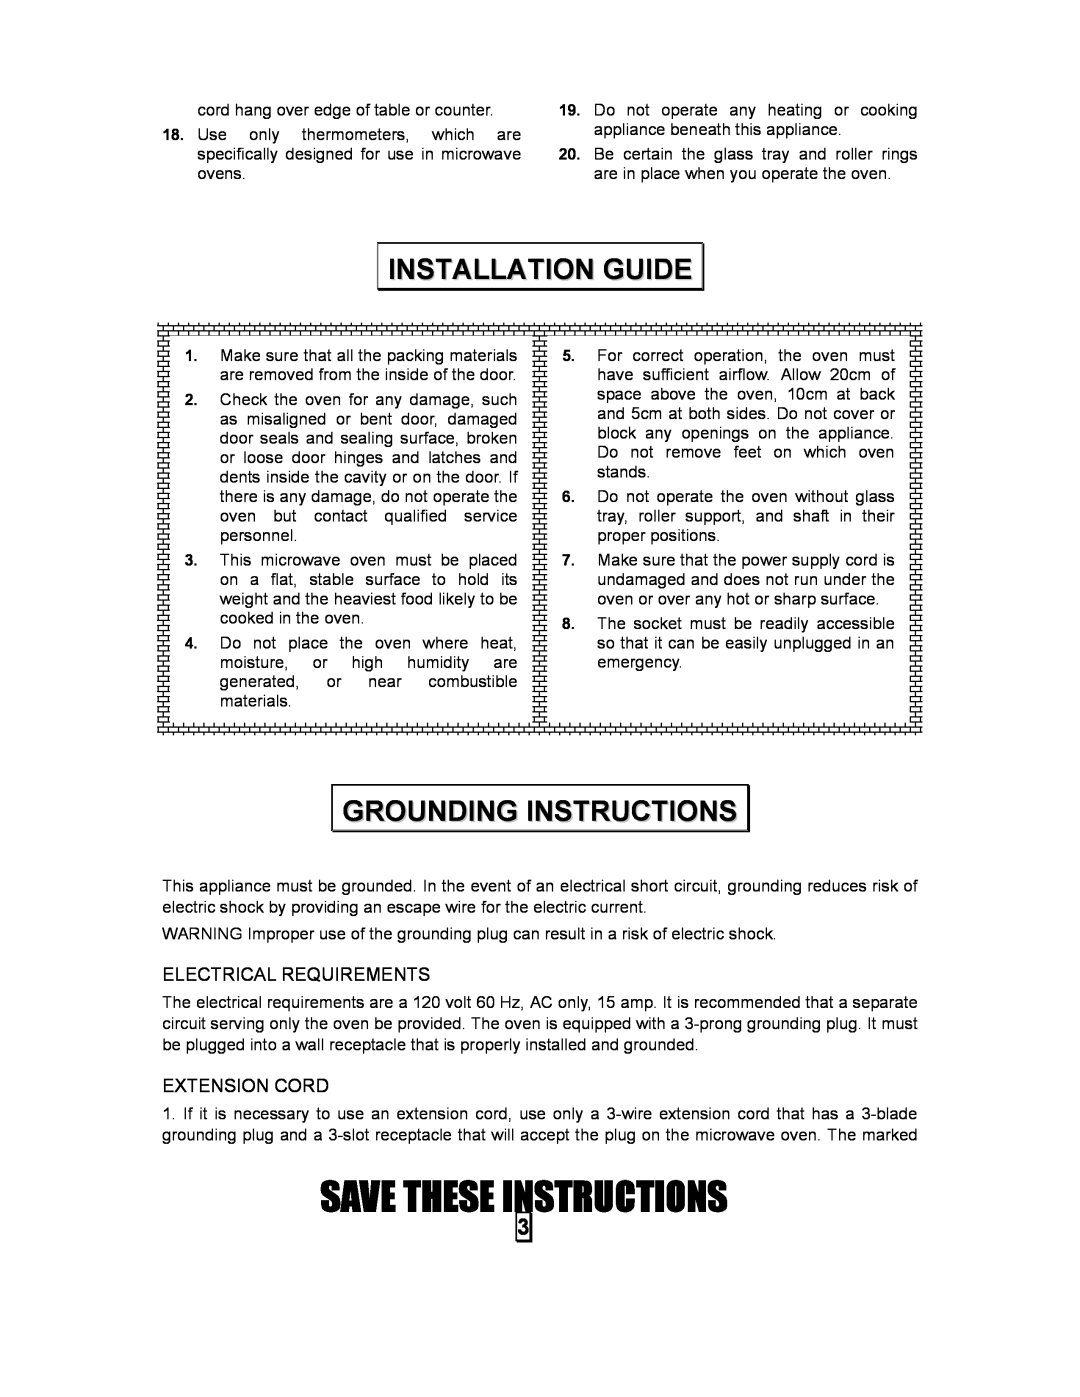 Sears 86030 Installation Guide, Grounding Instructions, Electrical Requirements, Extension Cord, Save These Instructions 